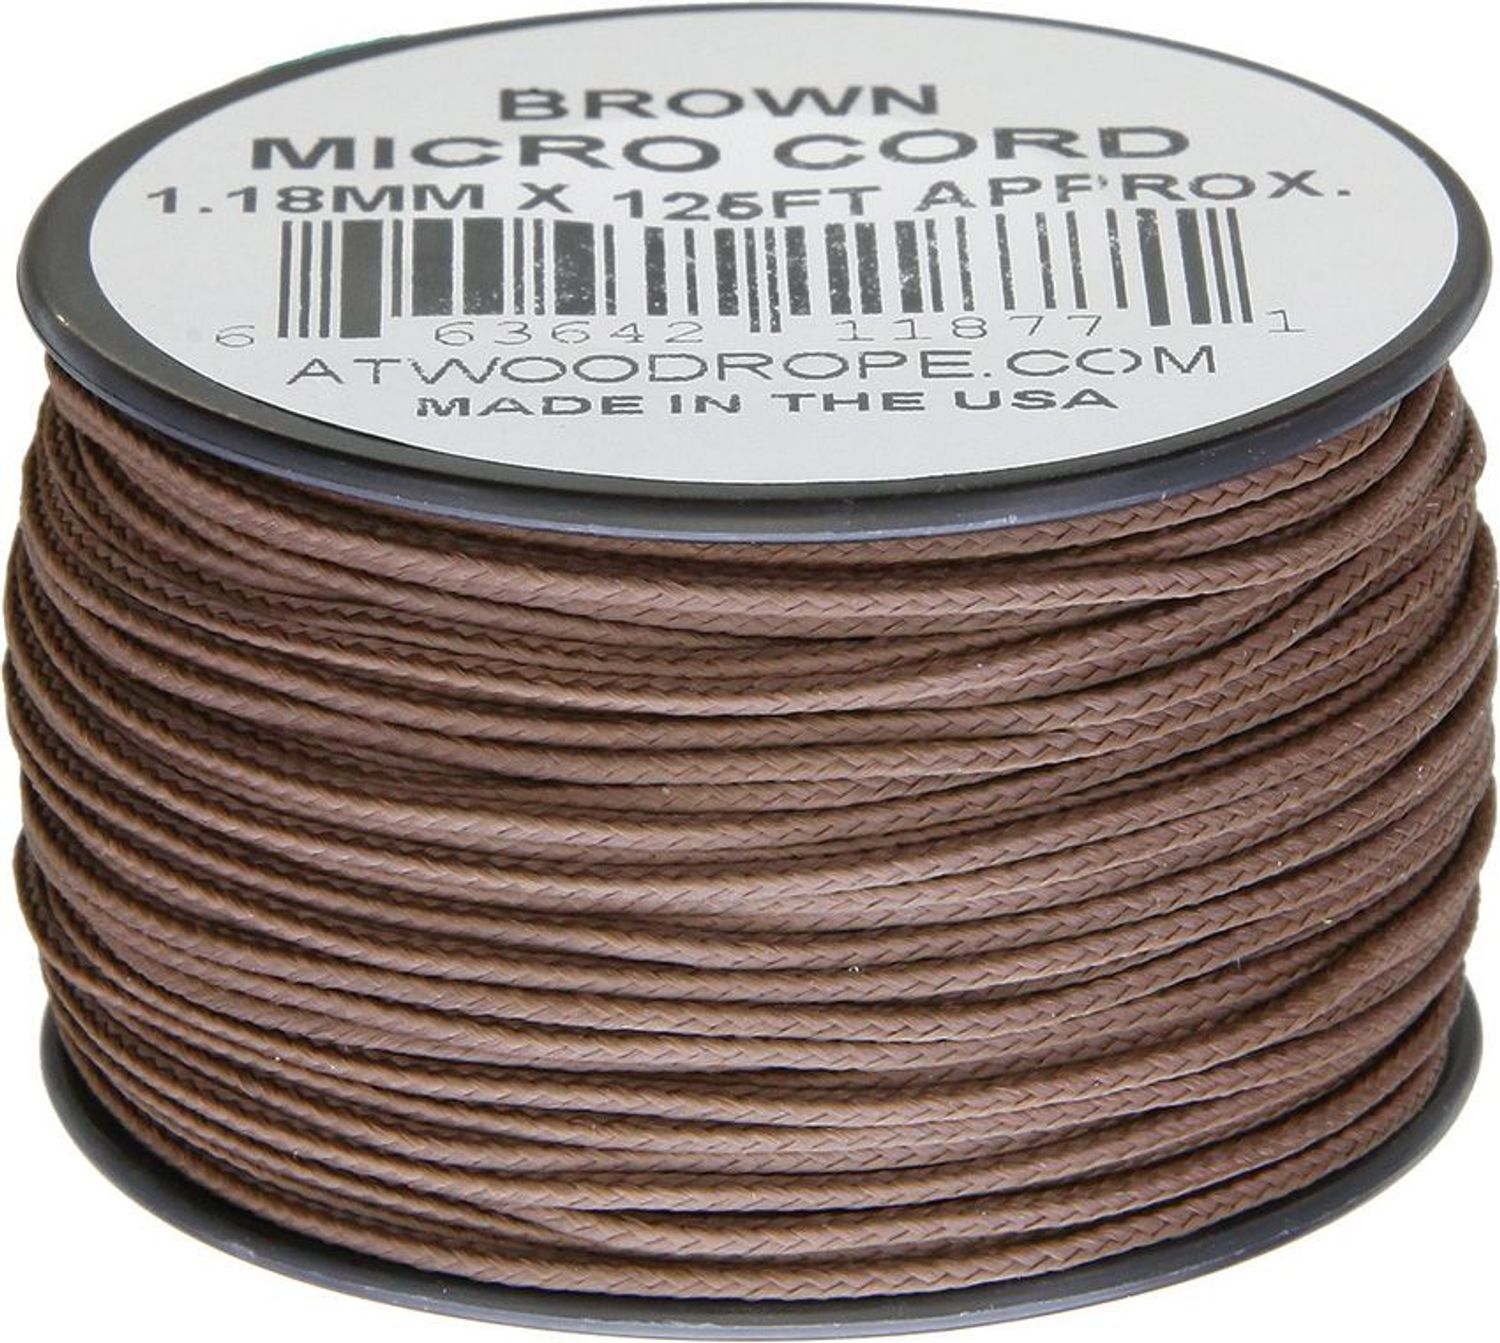 Atwood Rope Micro Cord, Brown, 125 Feet - KnifeCenter - RG1273